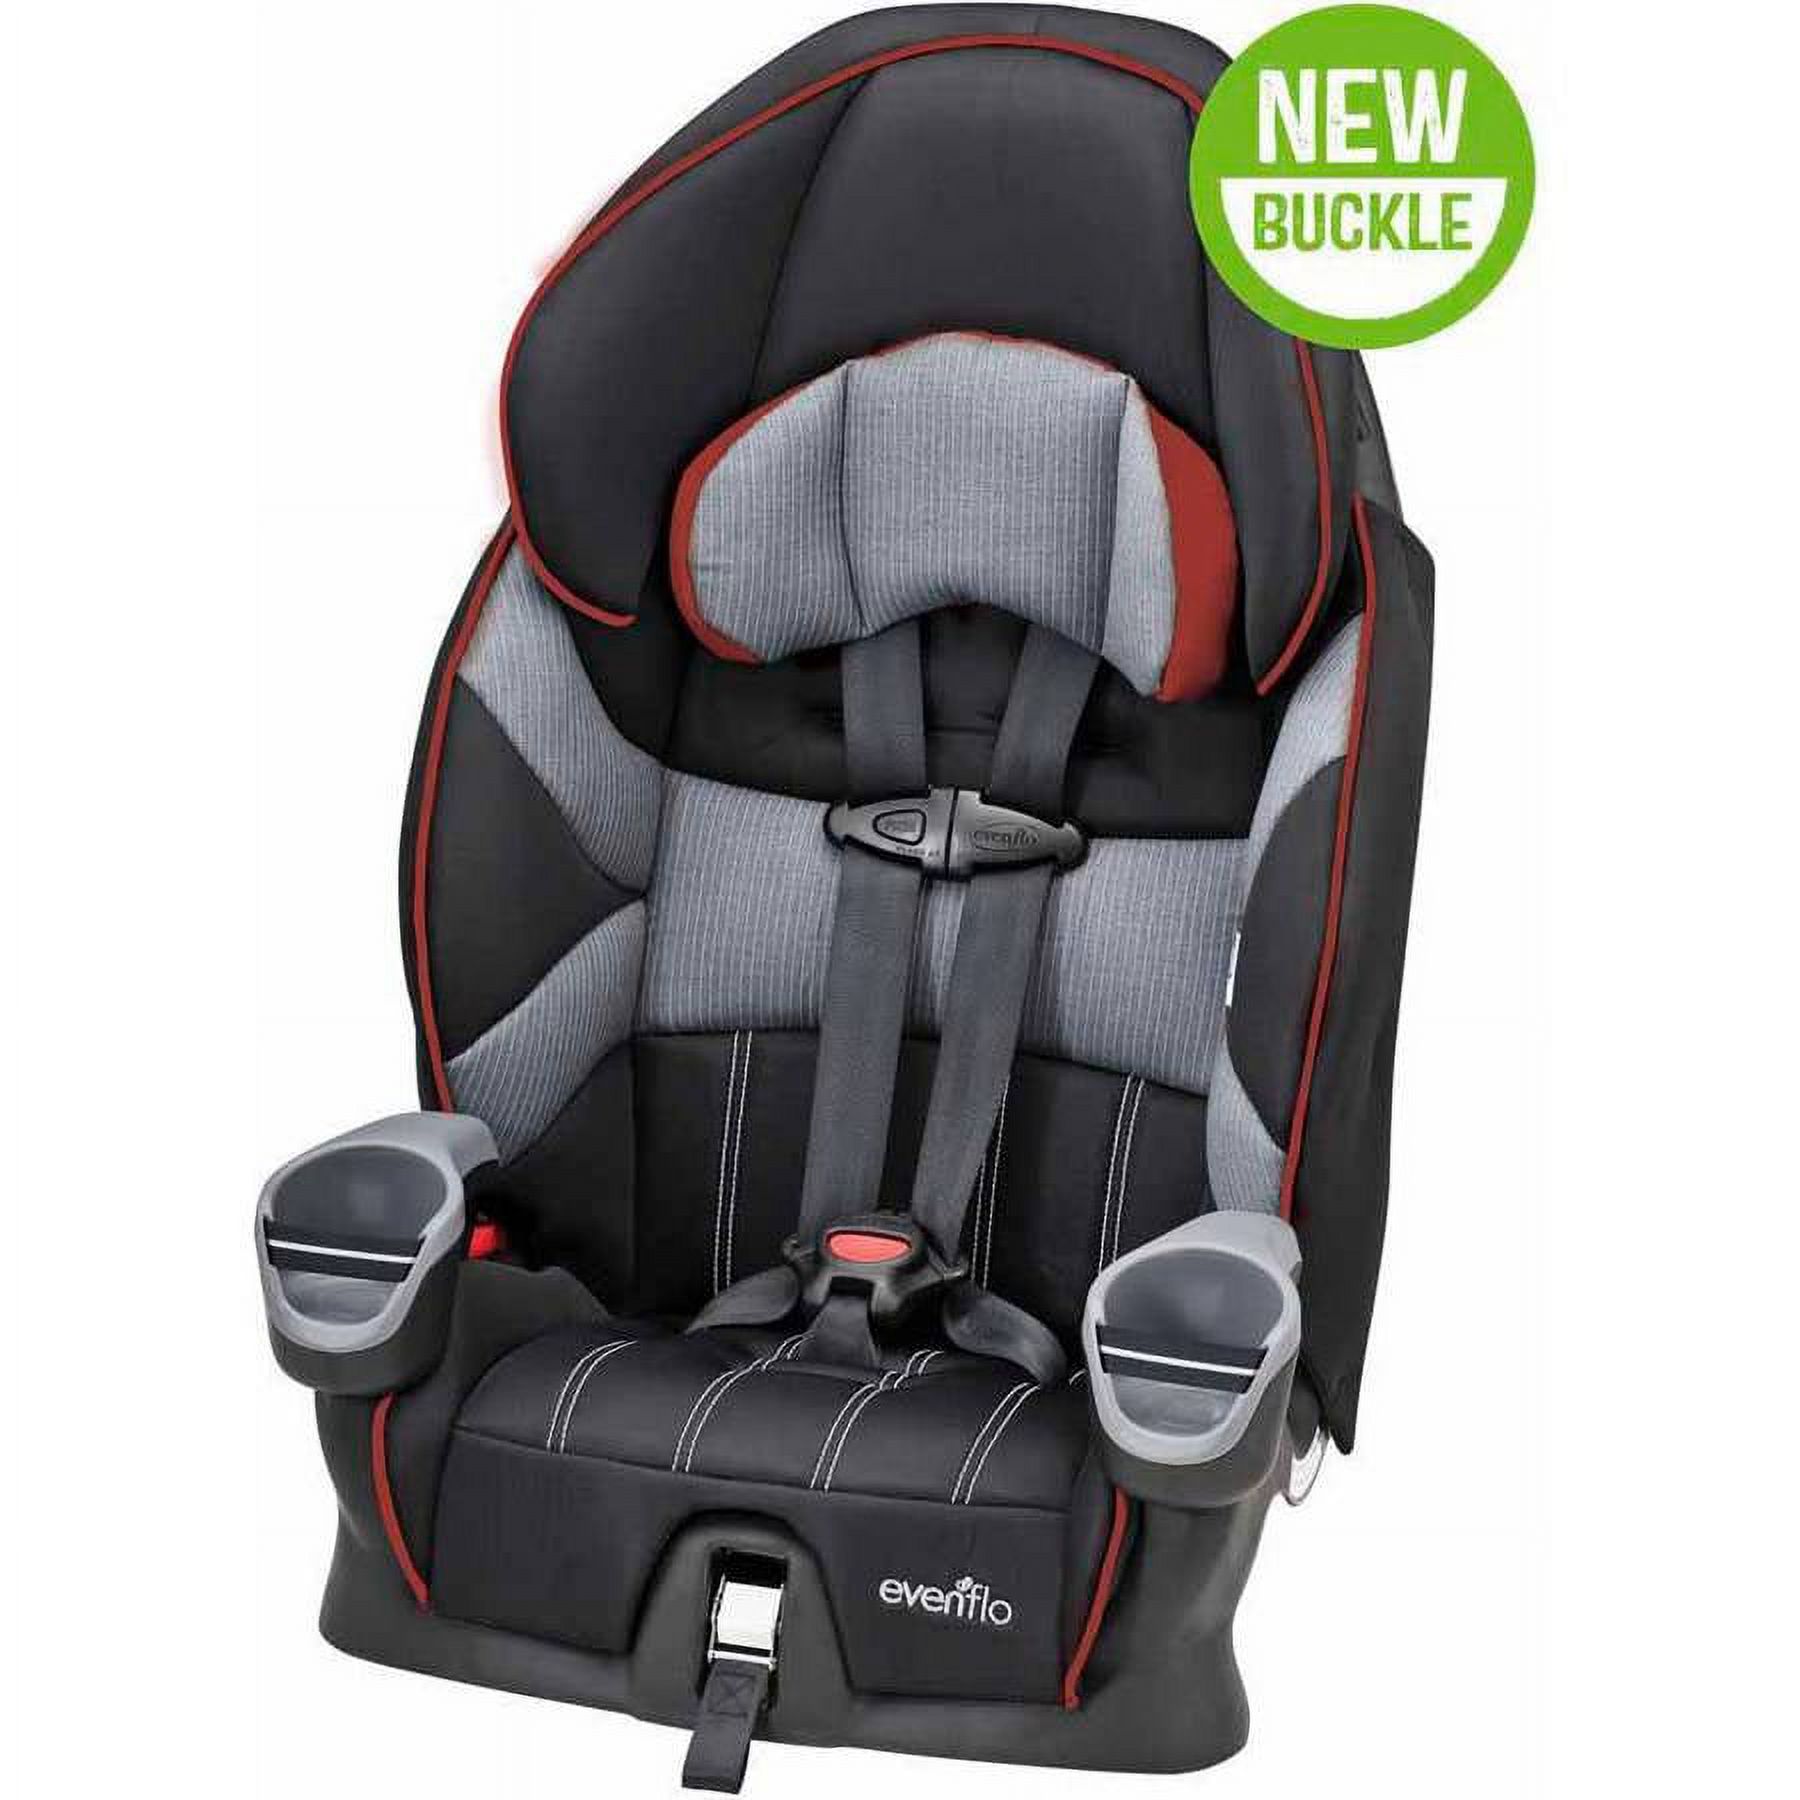 Evenflo Maestro Harness Booster Car Seat, choose your color - image 1 of 6